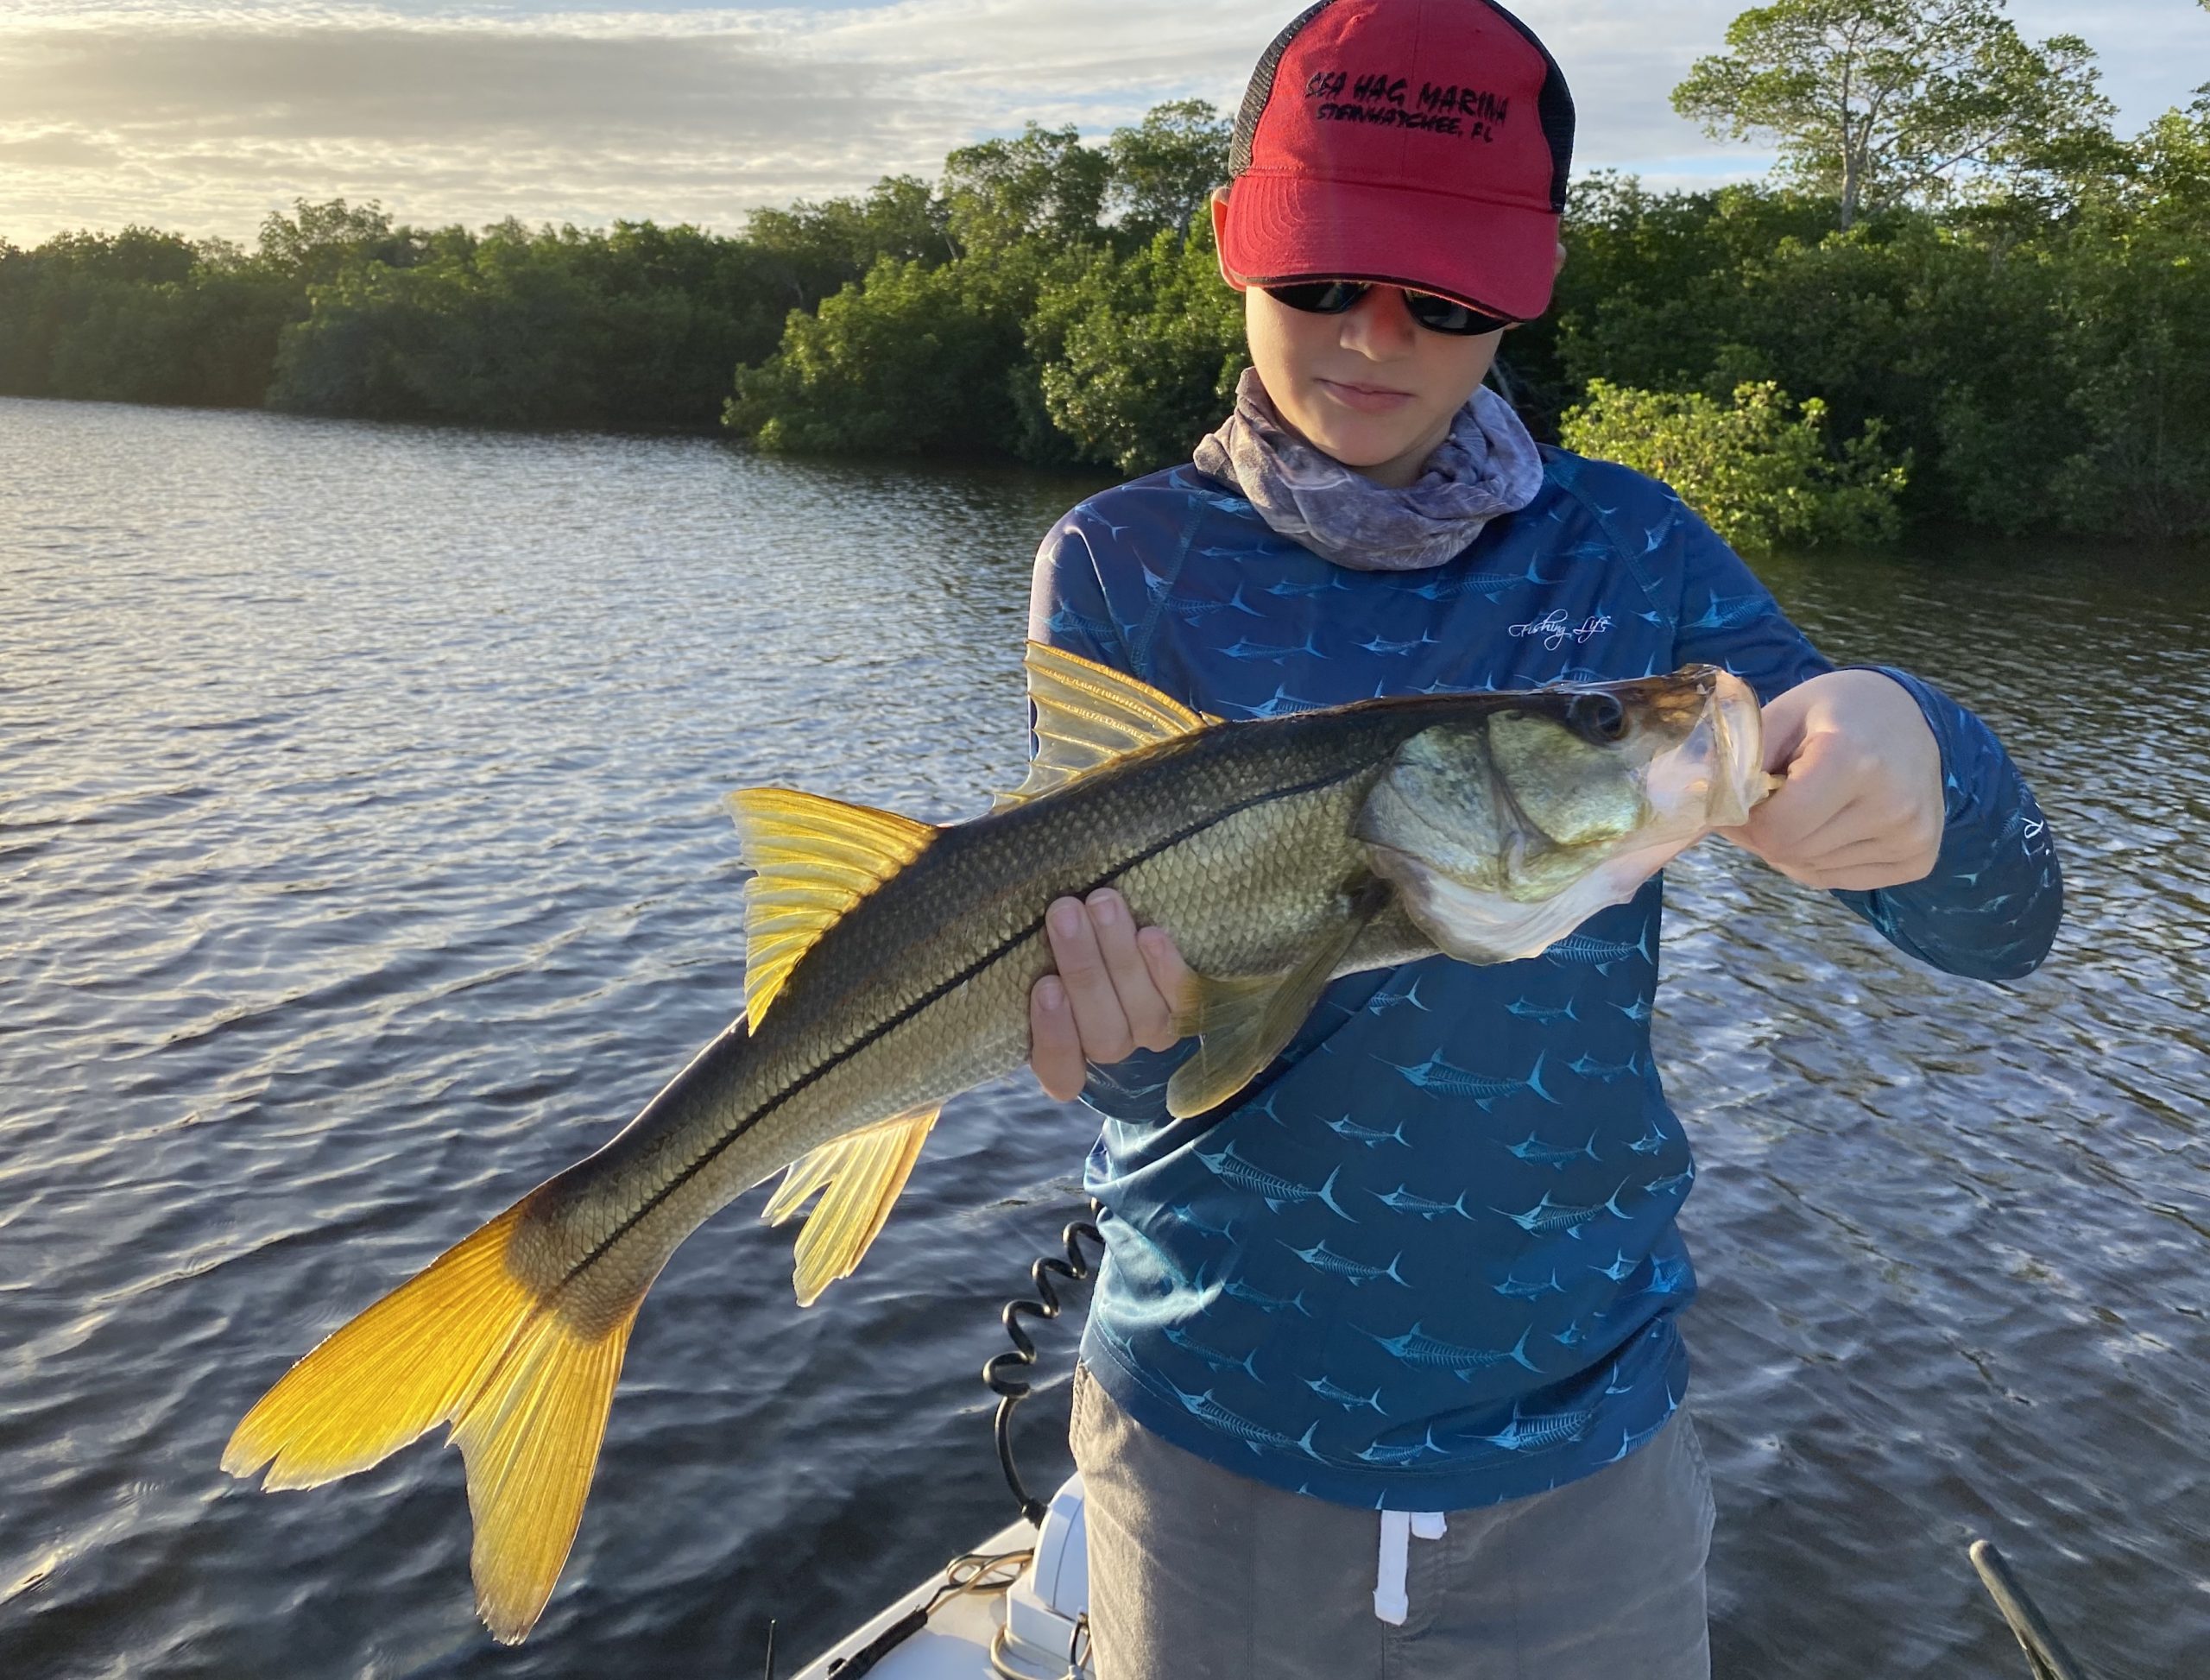 The author's son holds a snook